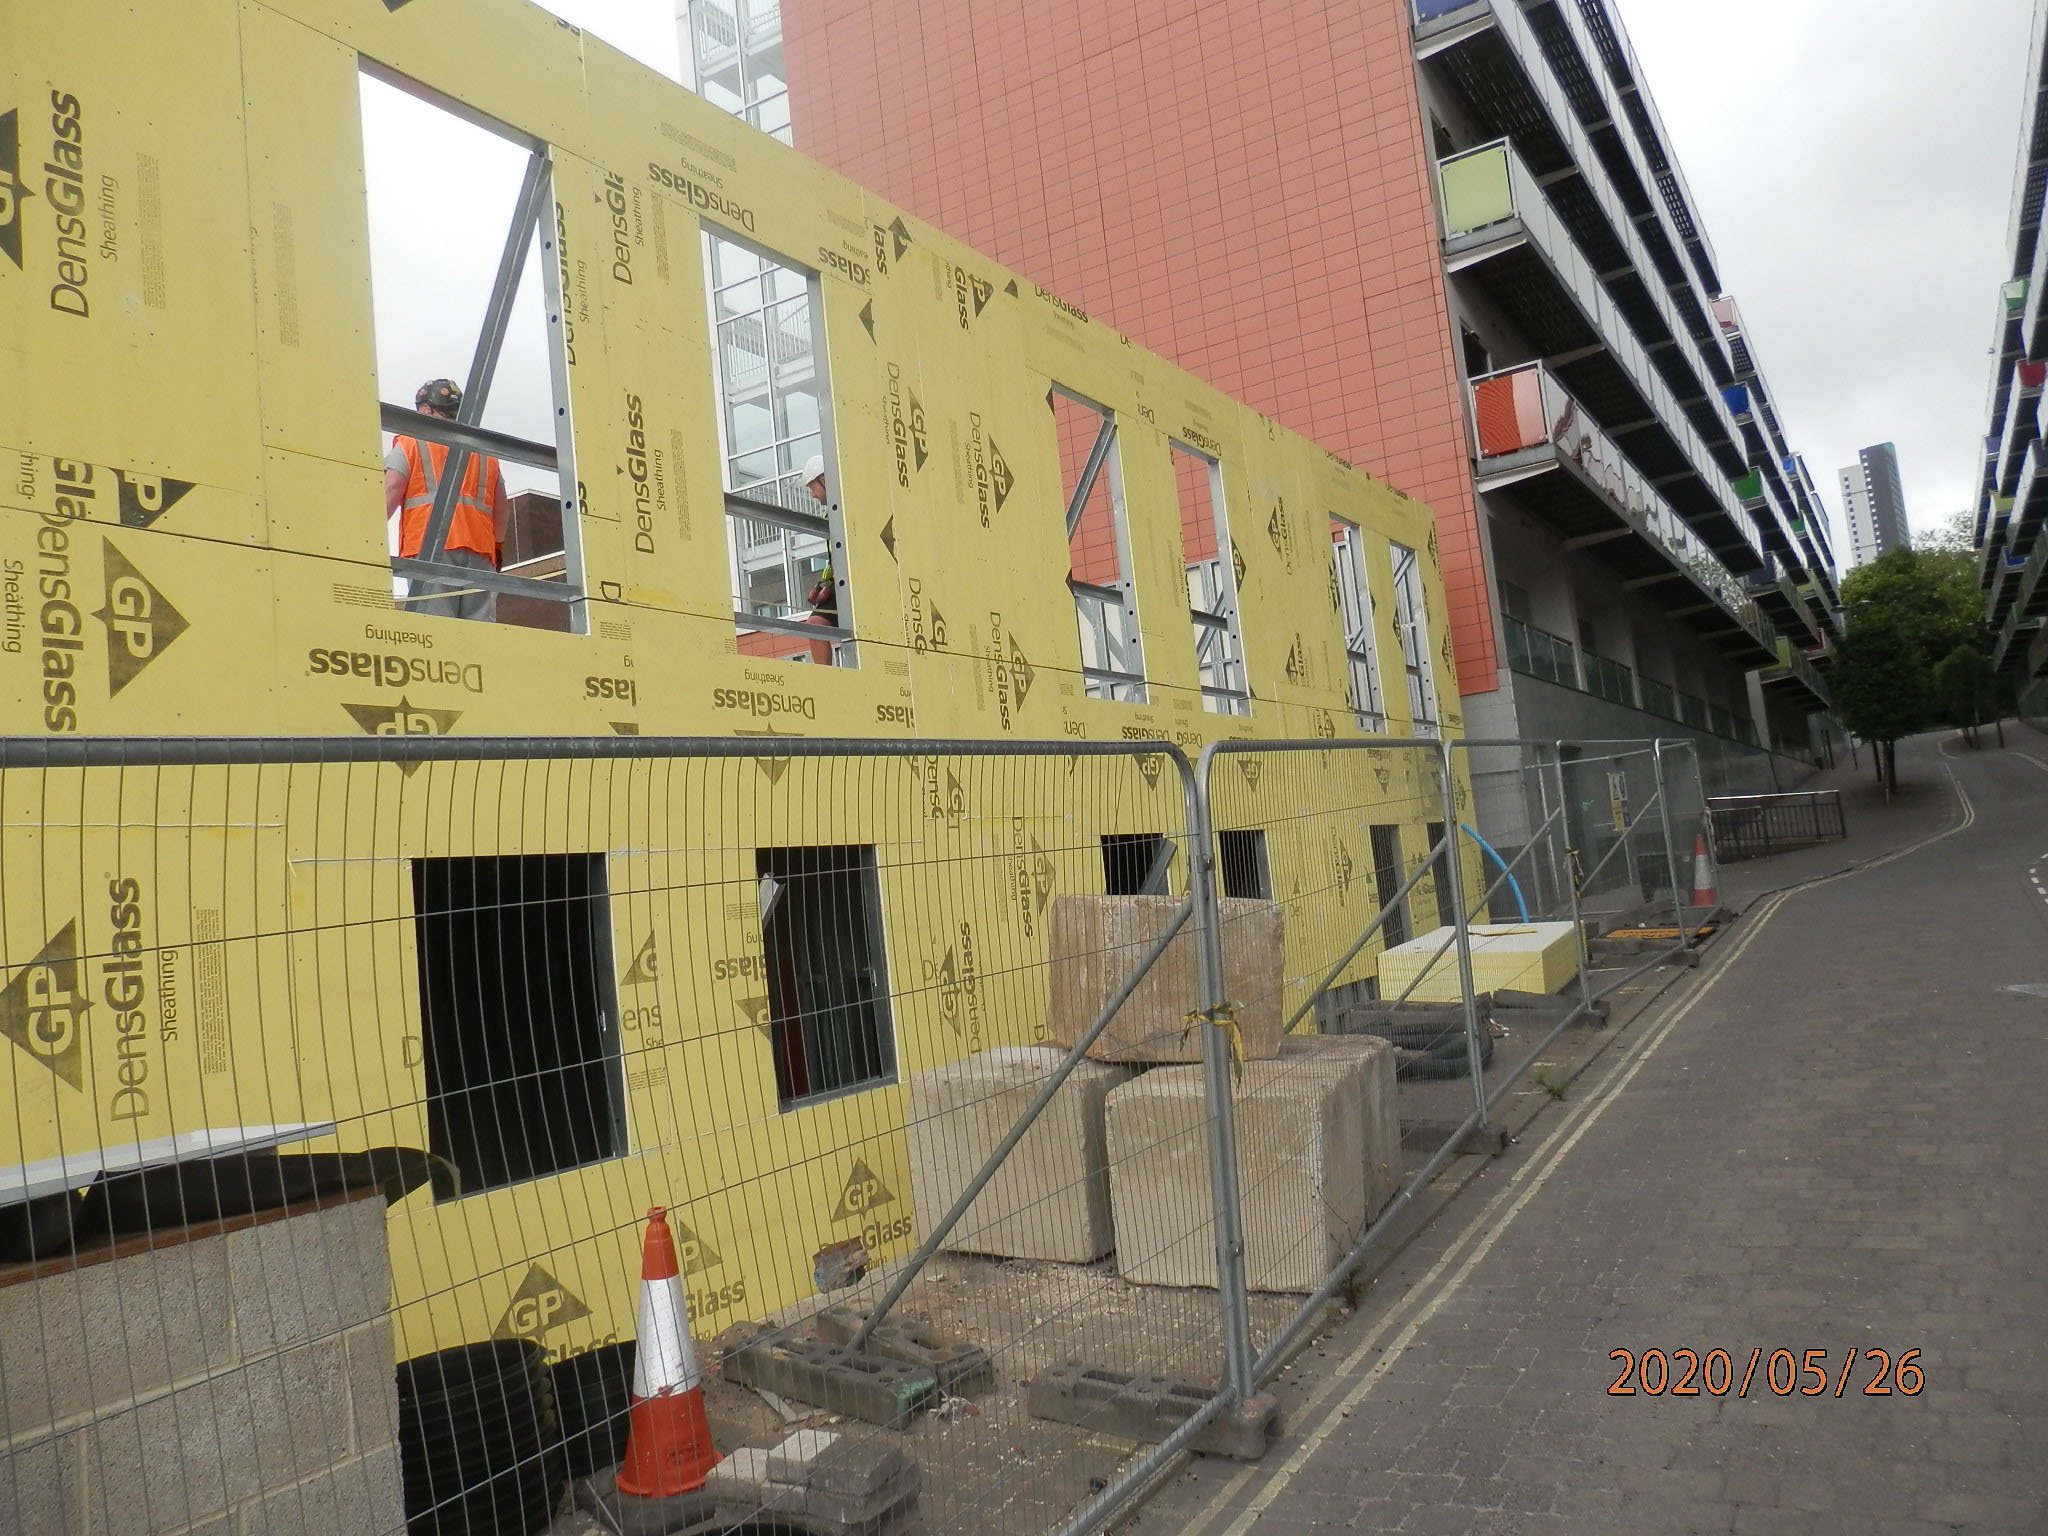 Frameclad uses smart offsite construction for 9-storey Concord Street development